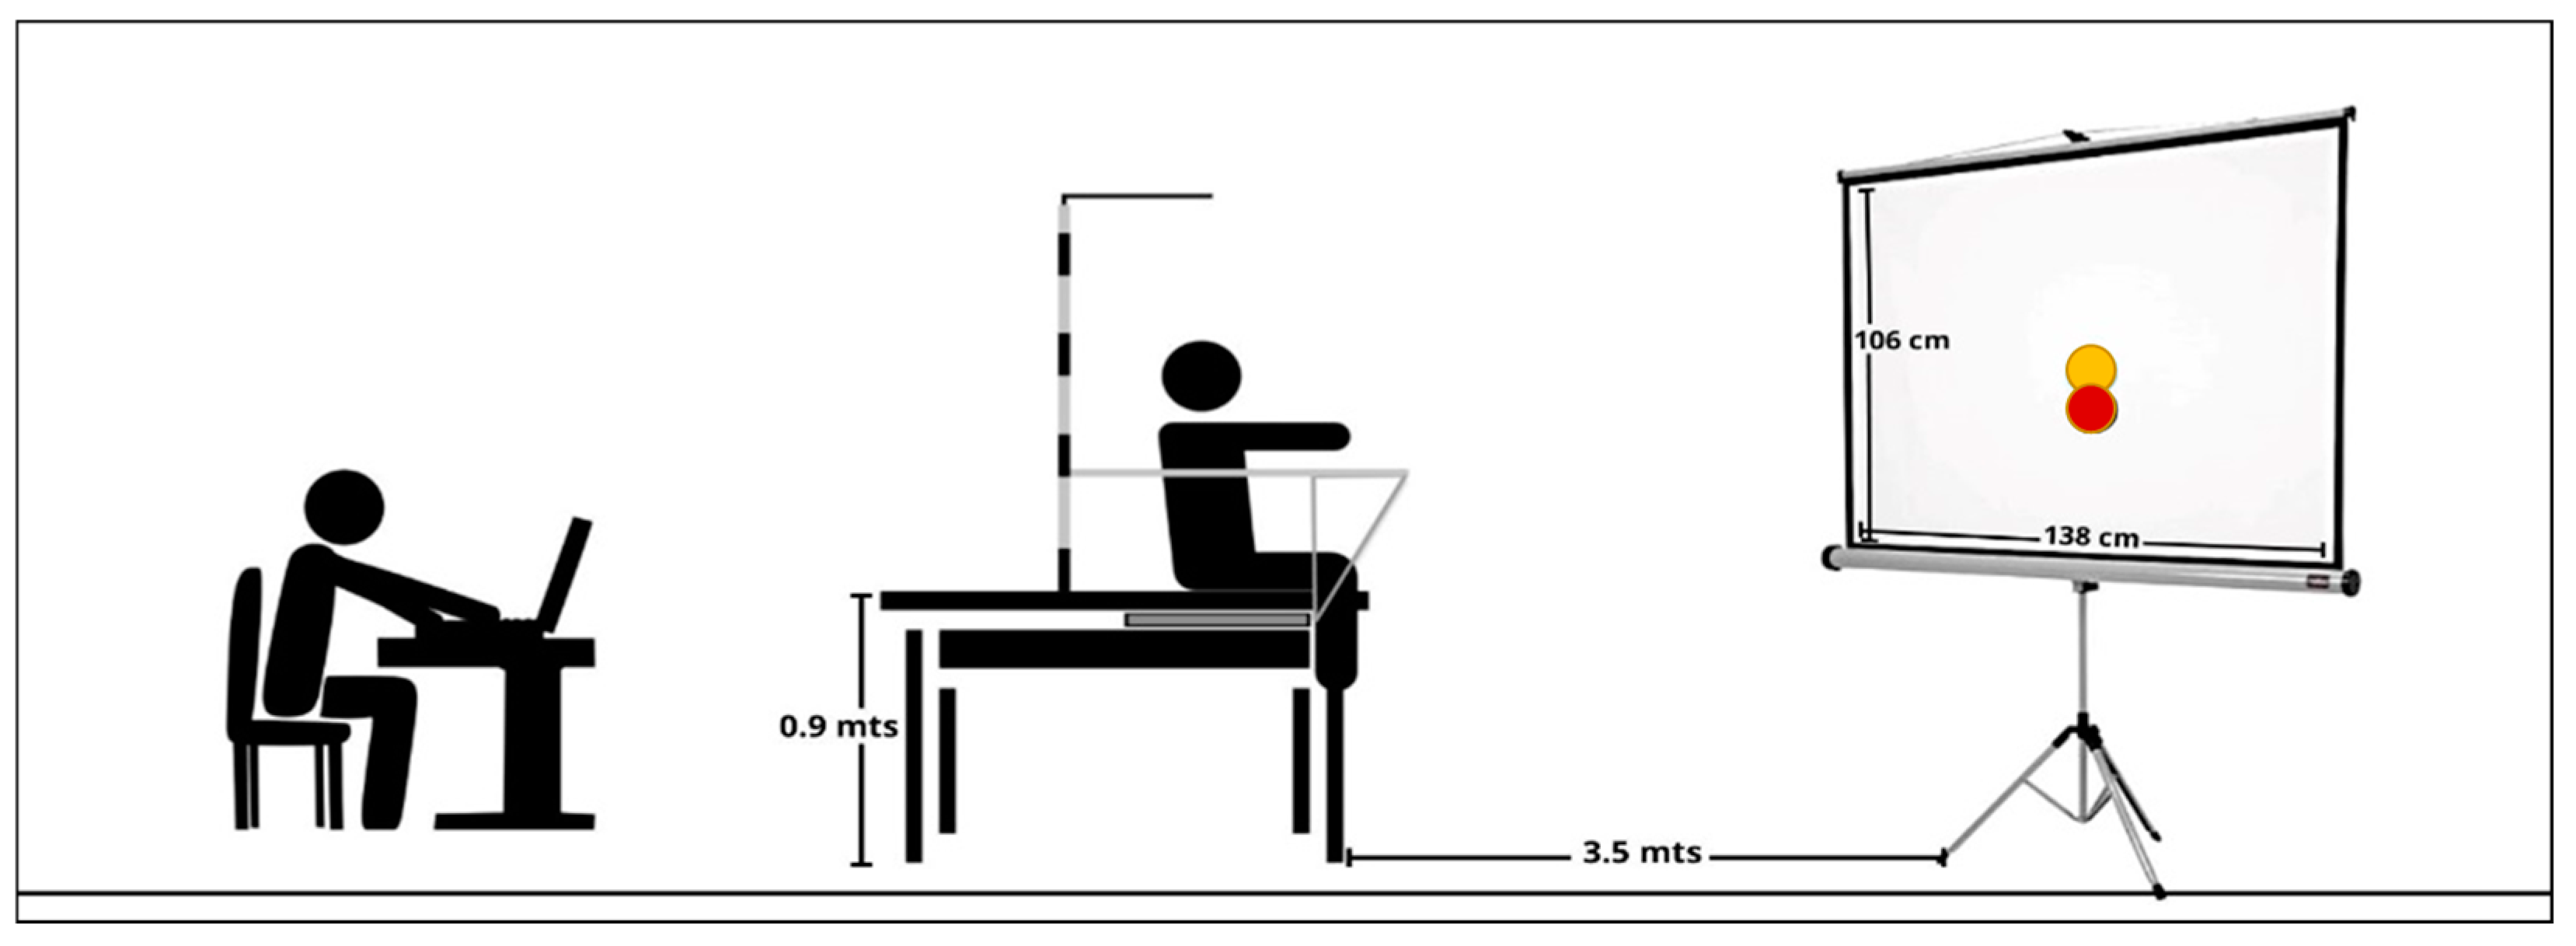 Solved To measure the trunk orientation of a seated subject